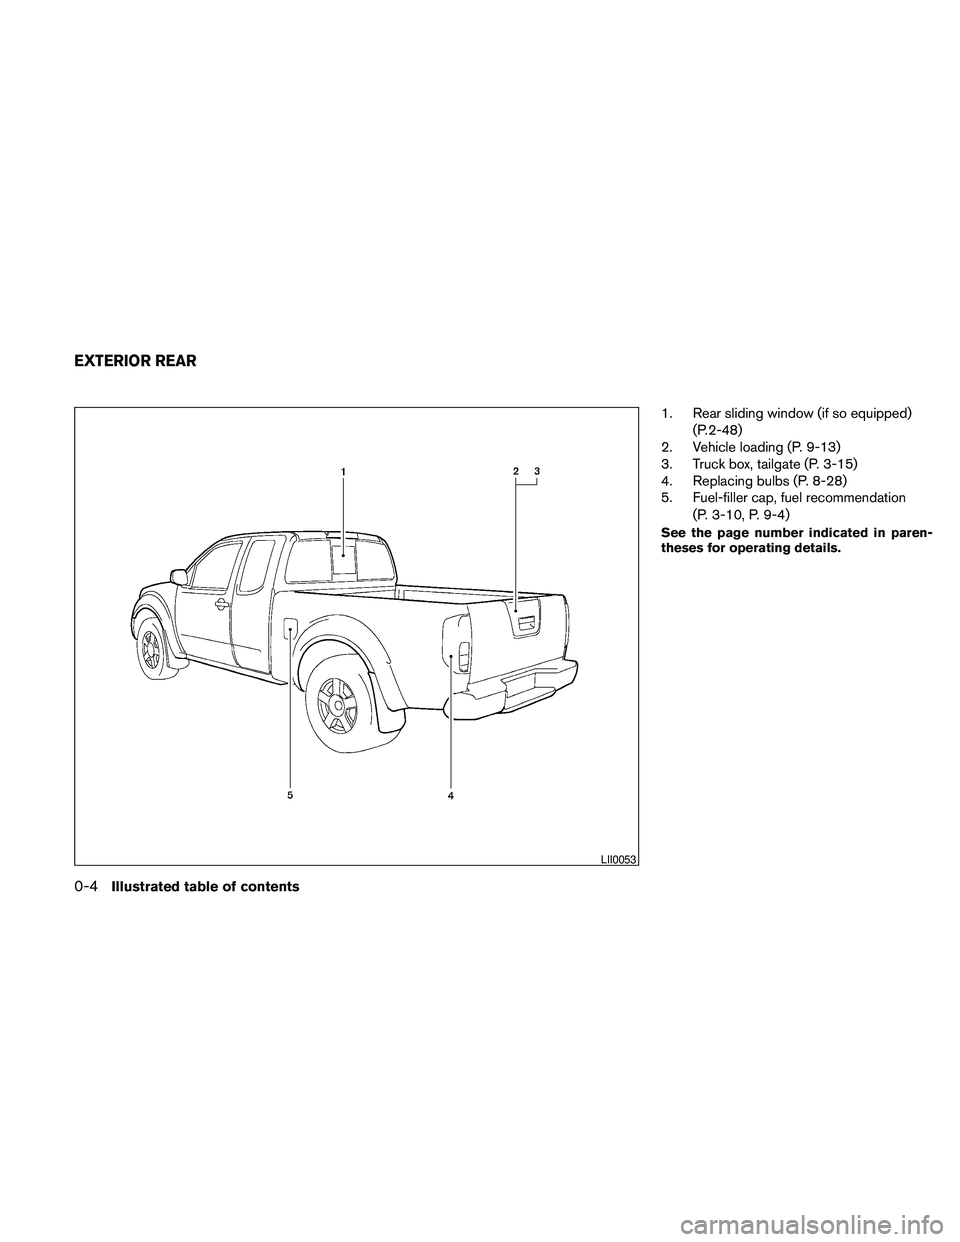 NISSAN FRONTIER 2010  Owner´s Manual 1. Rear sliding window (if so equipped)
(P.2-48)
2. Vehicle loading (P. 9-13)
3. Truck box, tailgate (P. 3-15)
4. Replacing bulbs (P. 8-28)
5. Fuel-filler cap, fuel recommendation
(P. 3-10, P. 9-4)
Se